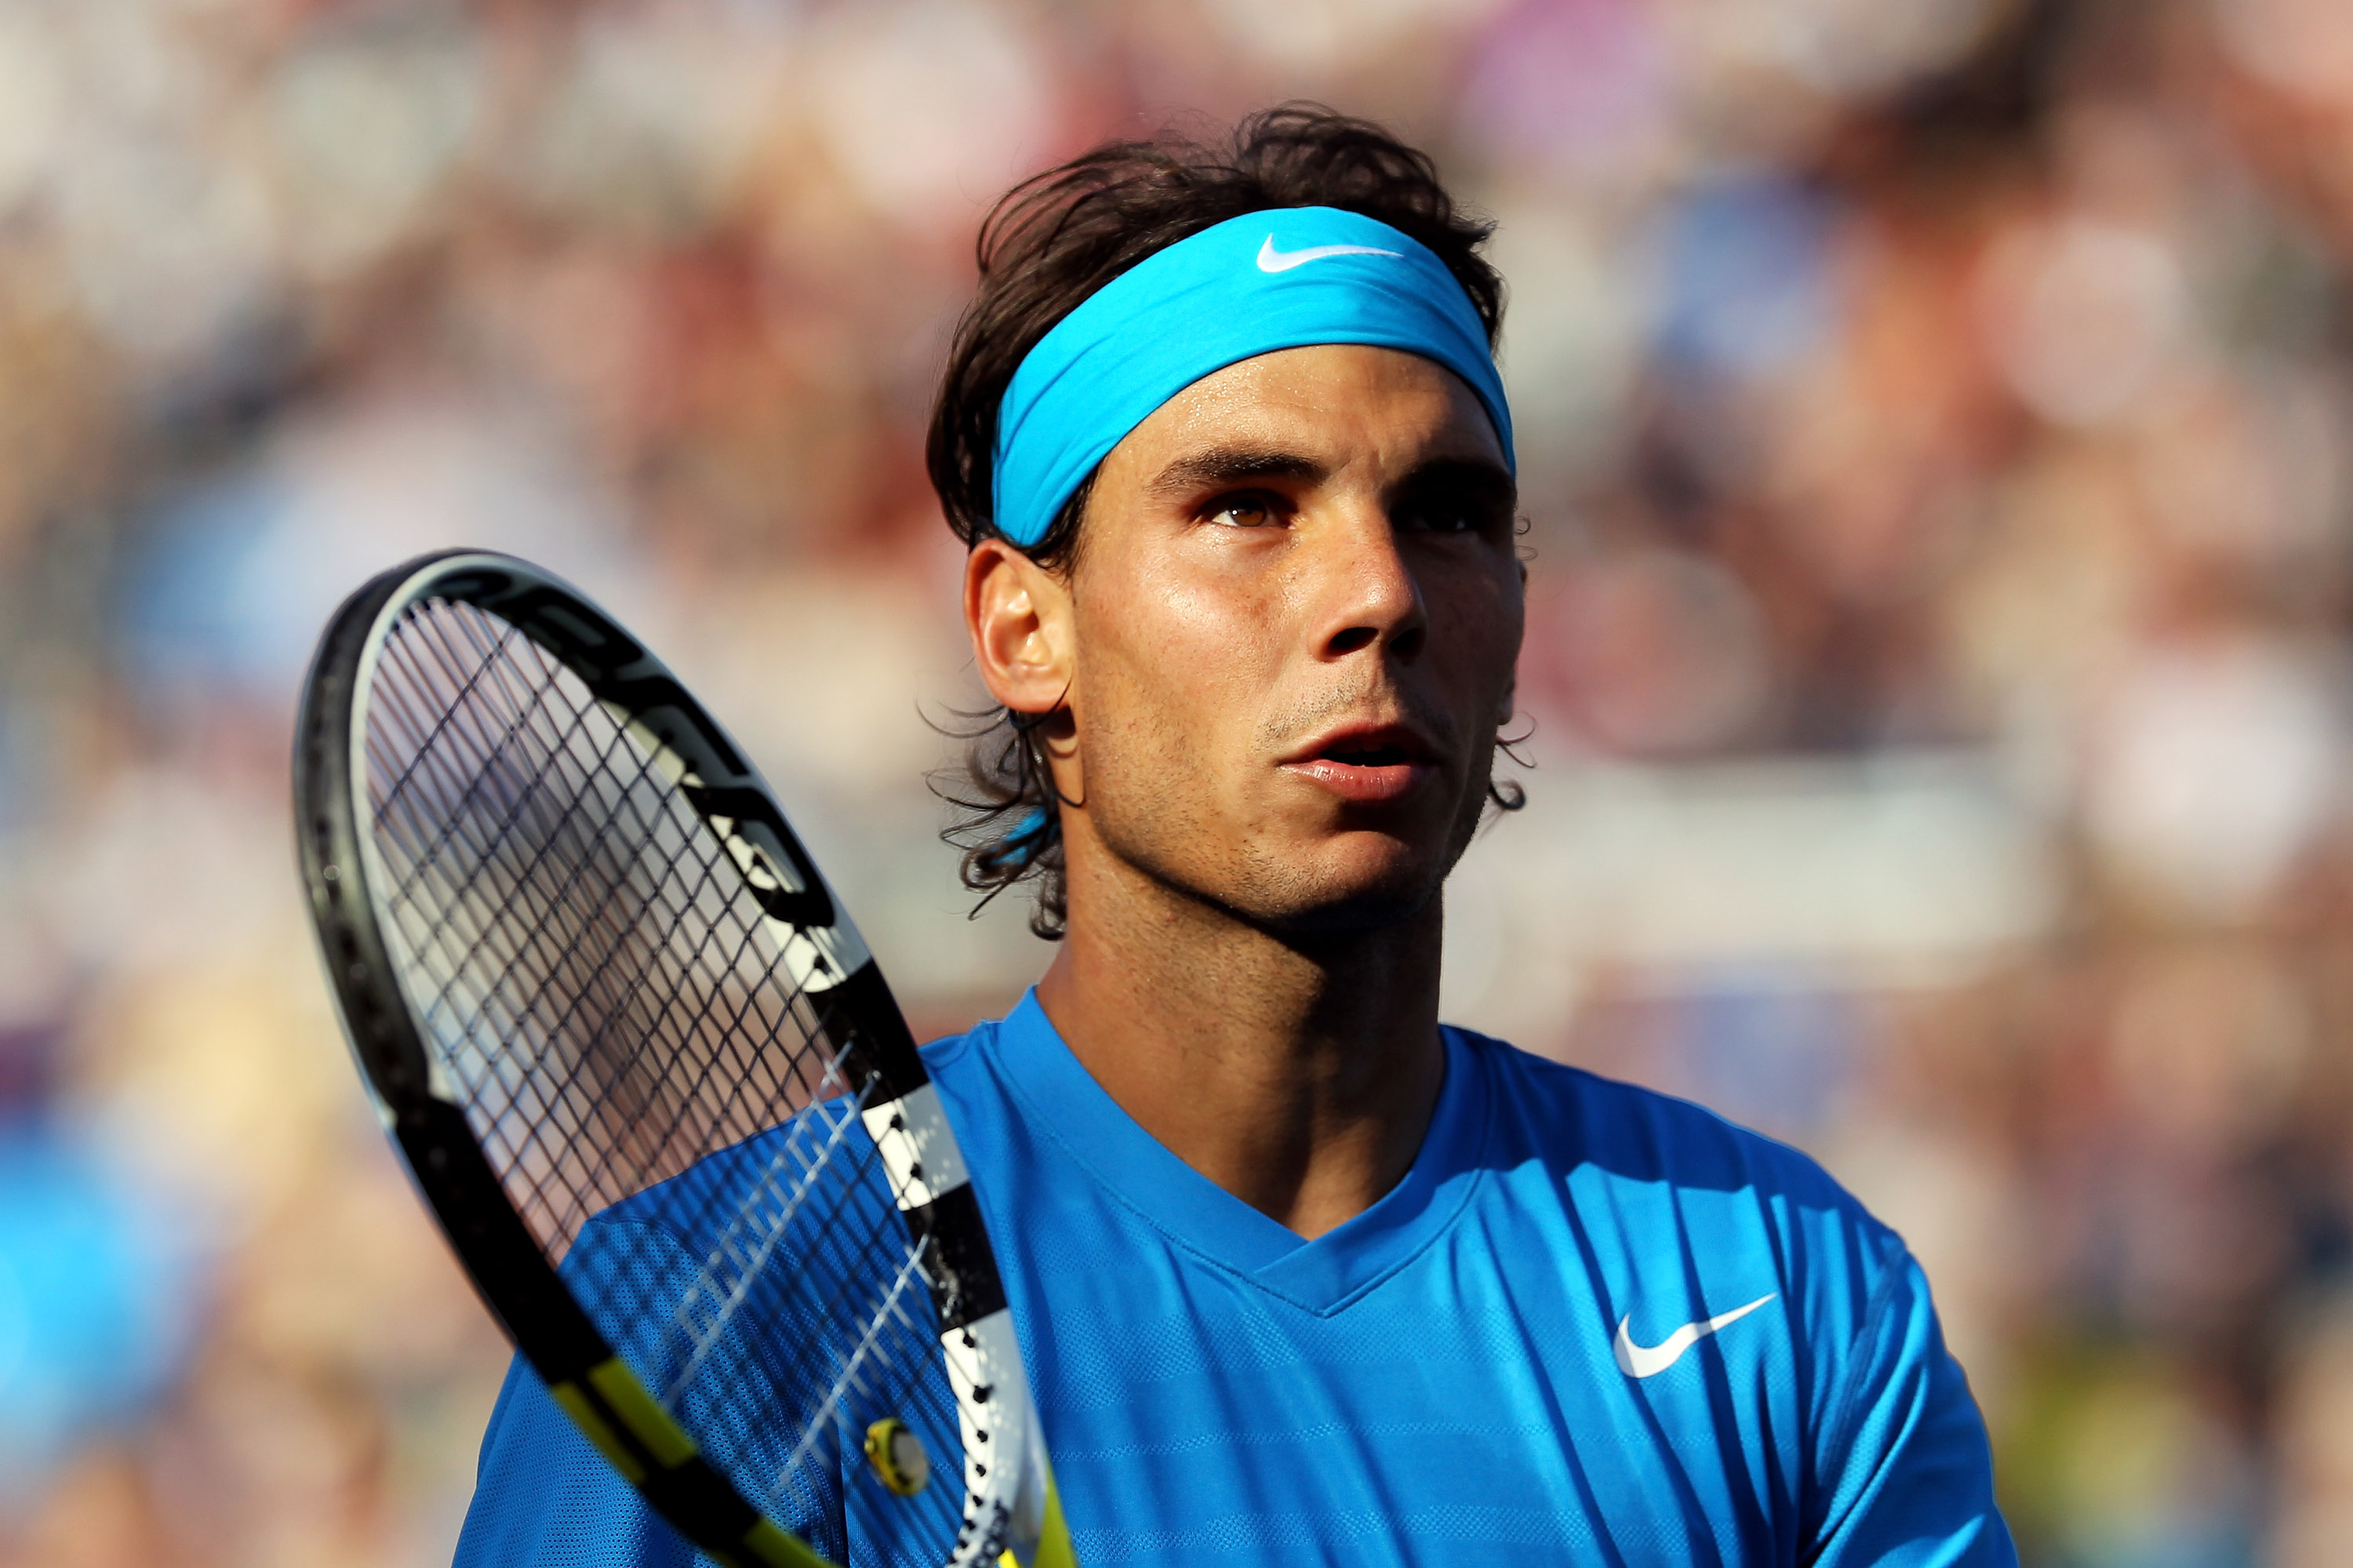 LONDON, ENGLAND - JUNE 09:  Rafael Nadal of Spain looks on during his Men's Singles third round match against Radek Stepanek of Czech Republic on day four of the AEGON Championships at Queens Club on June 9, 2011 in London, England.  (Photo by Julian Finn